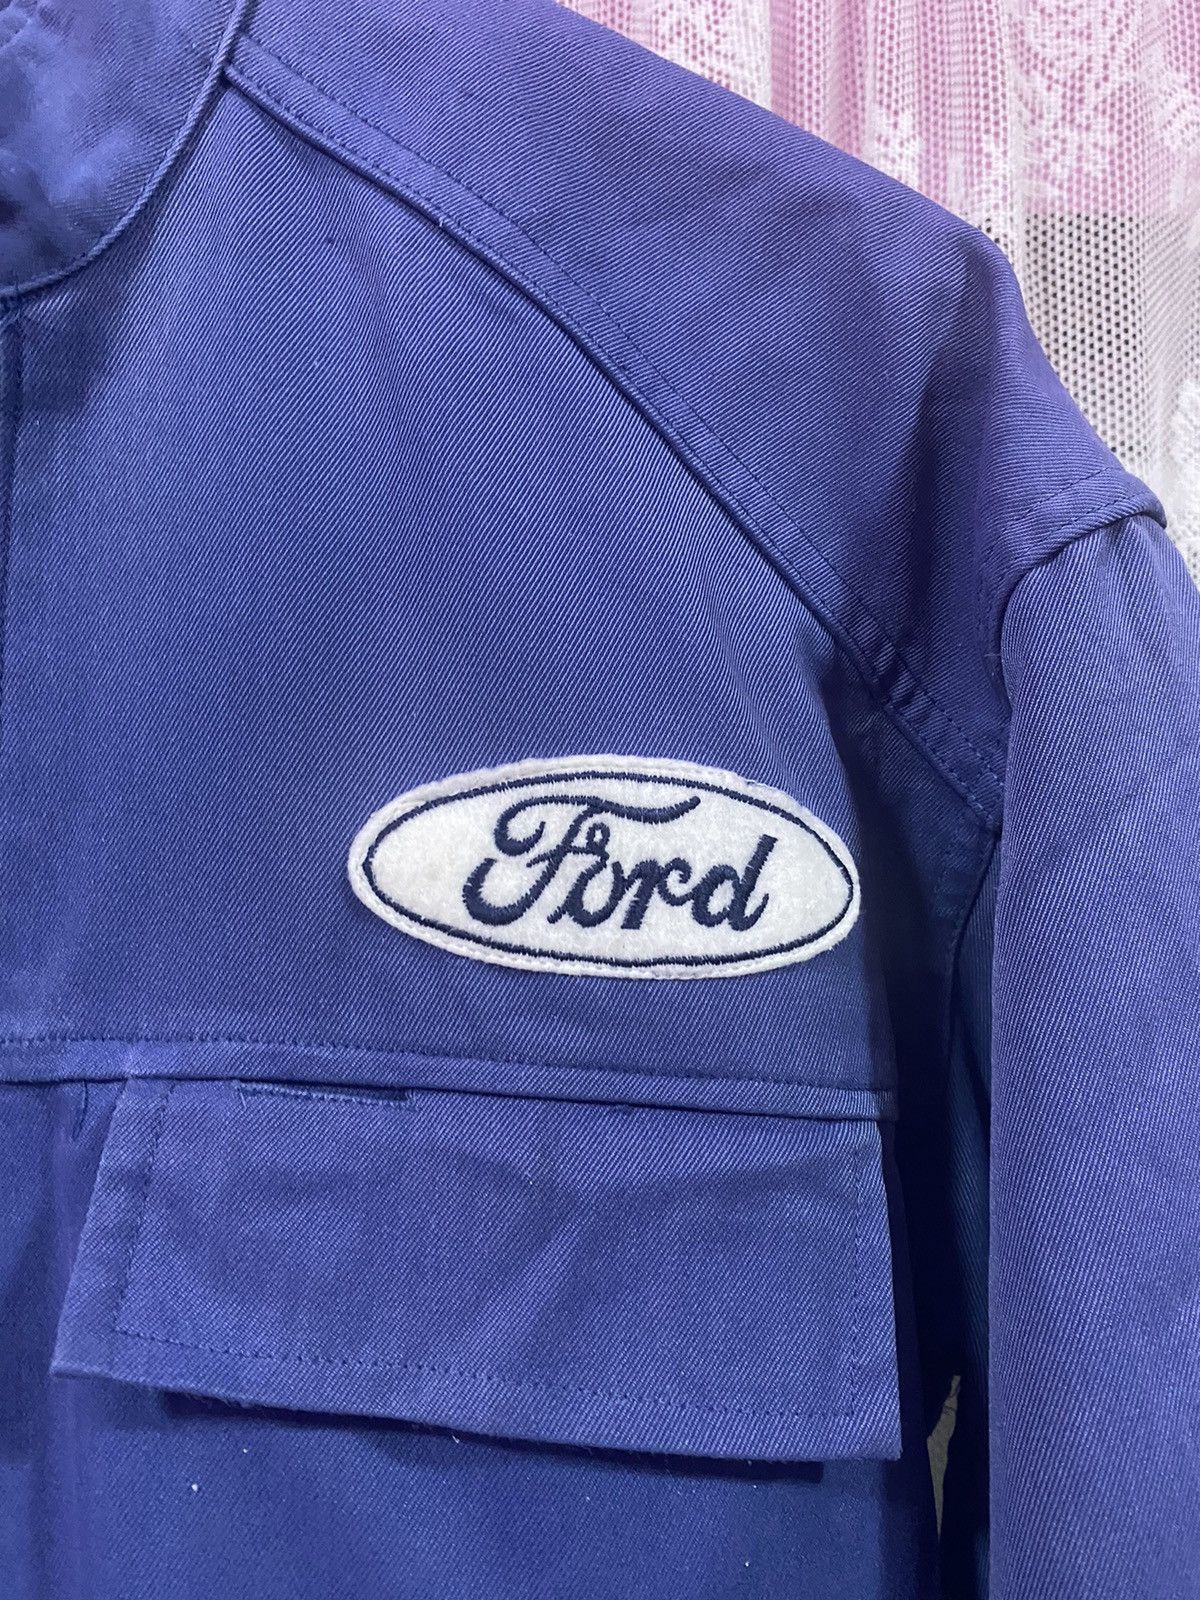 Rare Vintage Ford Racing Boilersuit Coverall Jumpsuit - 4